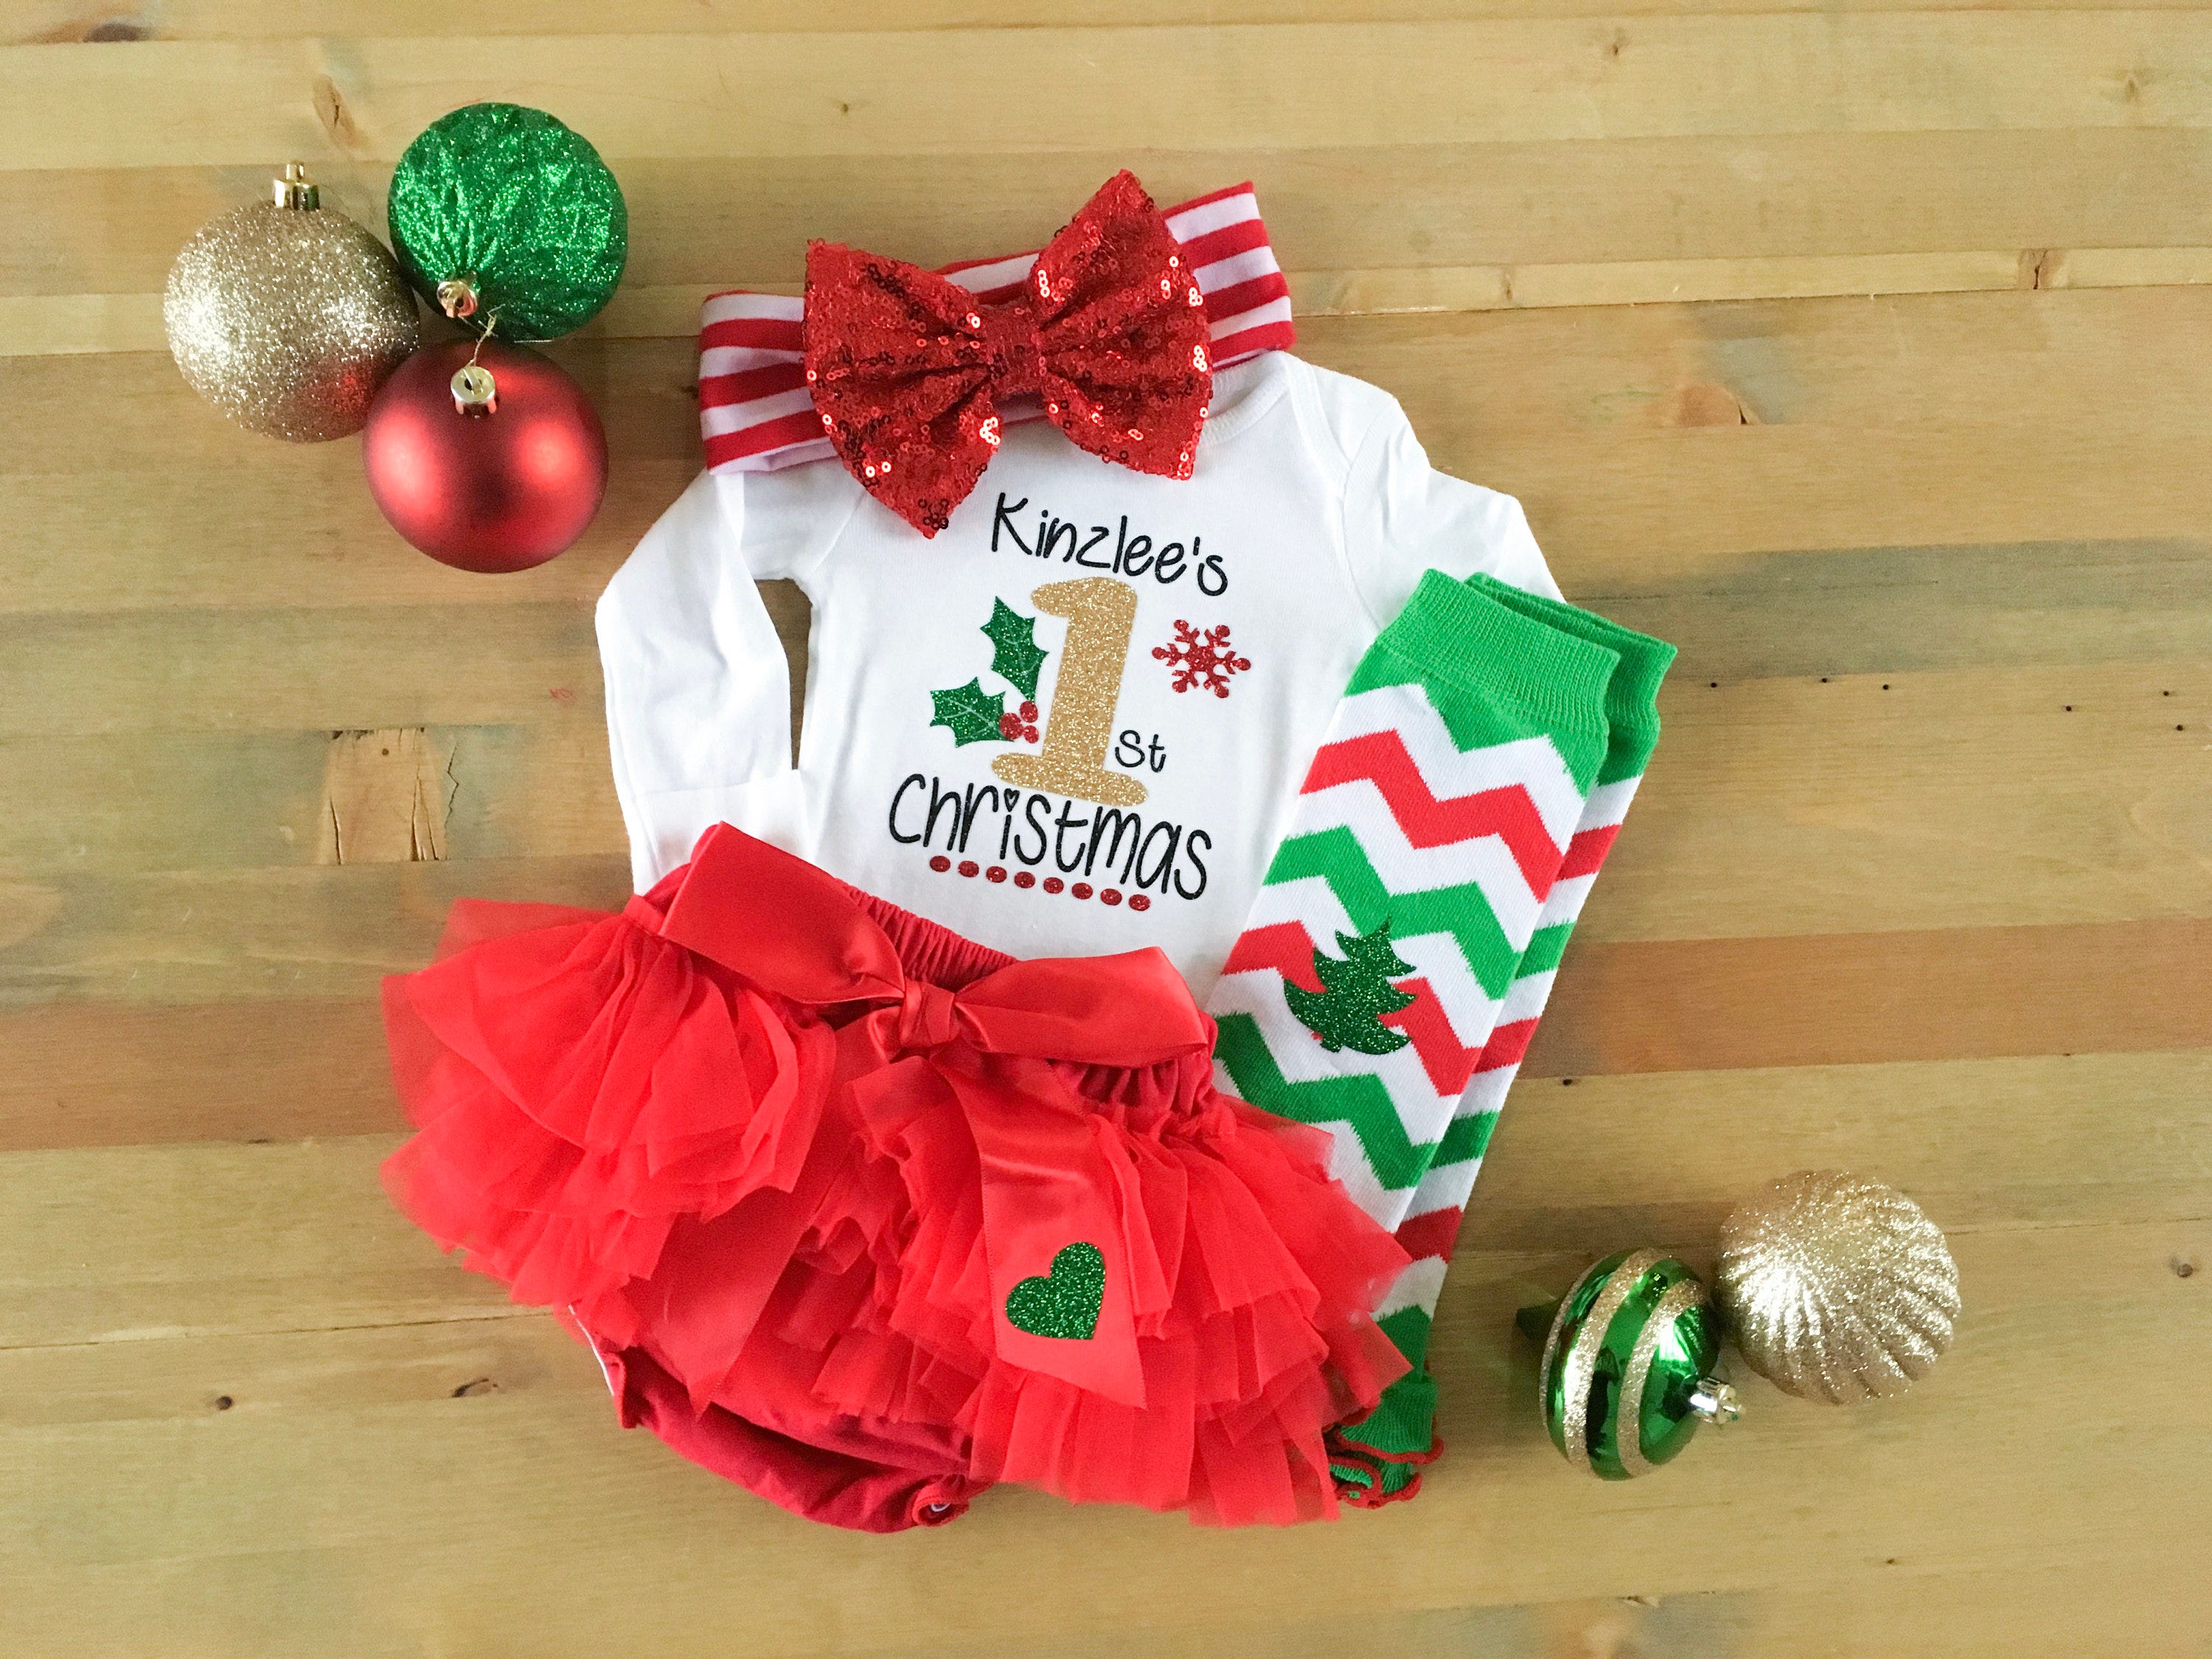 First Christmas Outfit For Girls, Girls Christmas Outfit With Name, Personalized 1st Christmas Outfit, Newborn Christmas Tutu, 1st Christmas